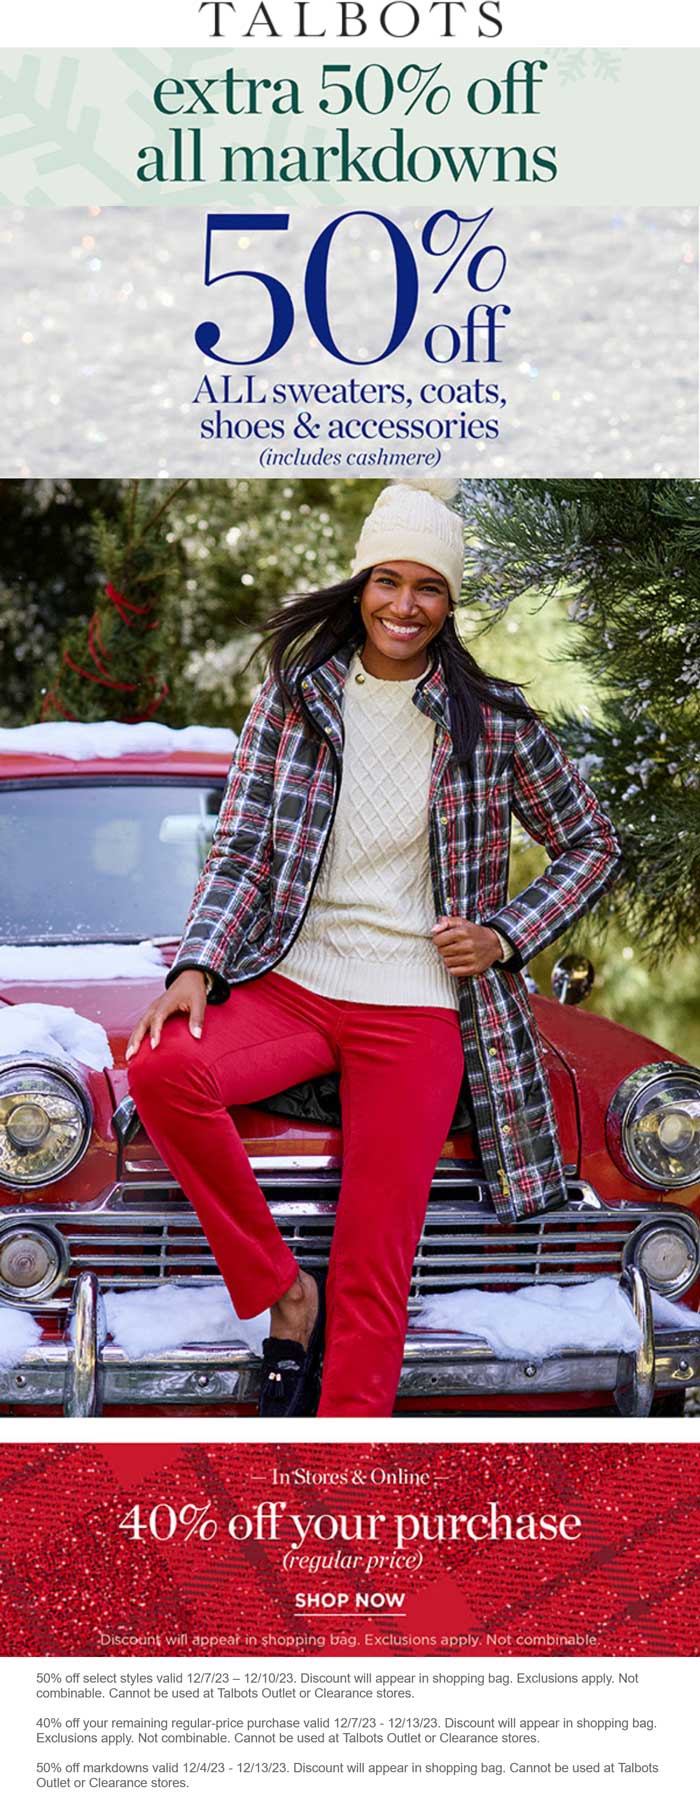 40% off everything & extr 50% off sale items today at Talbots, ditto online #talbots